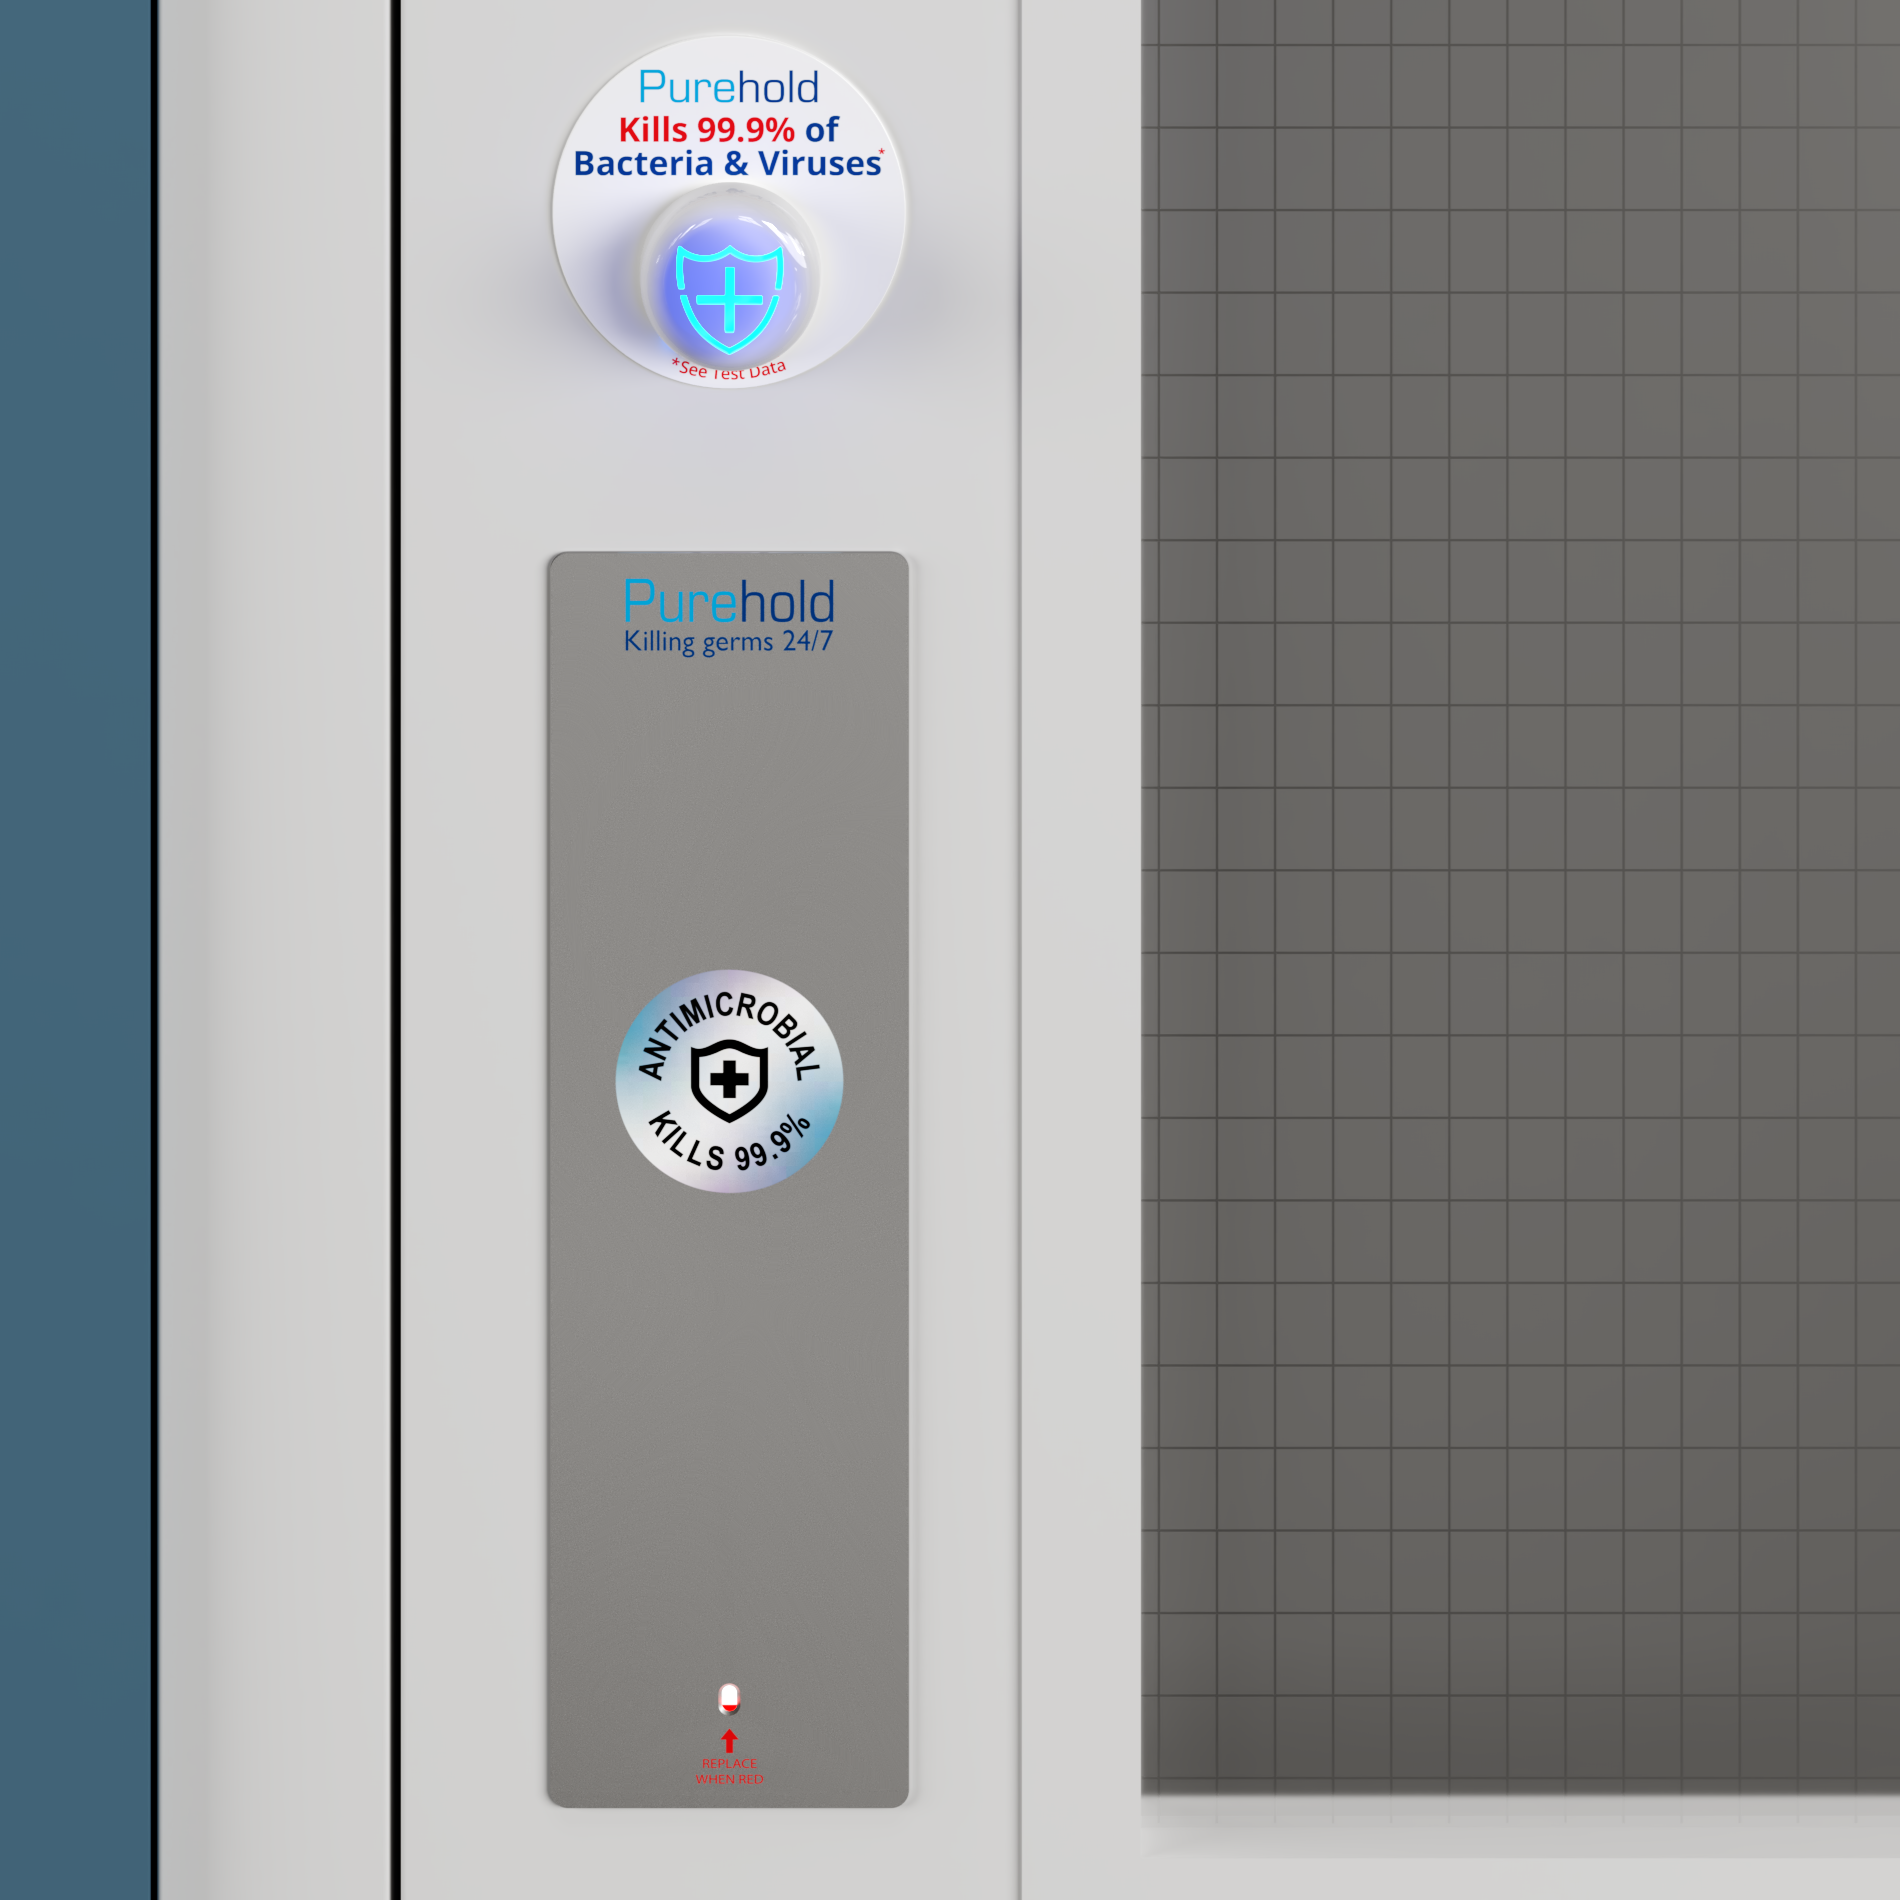 Purehold Push Antimicrobial Replacement Door Push Plate (Standard Size) - Including VHR Technology - PH-PUSH-1